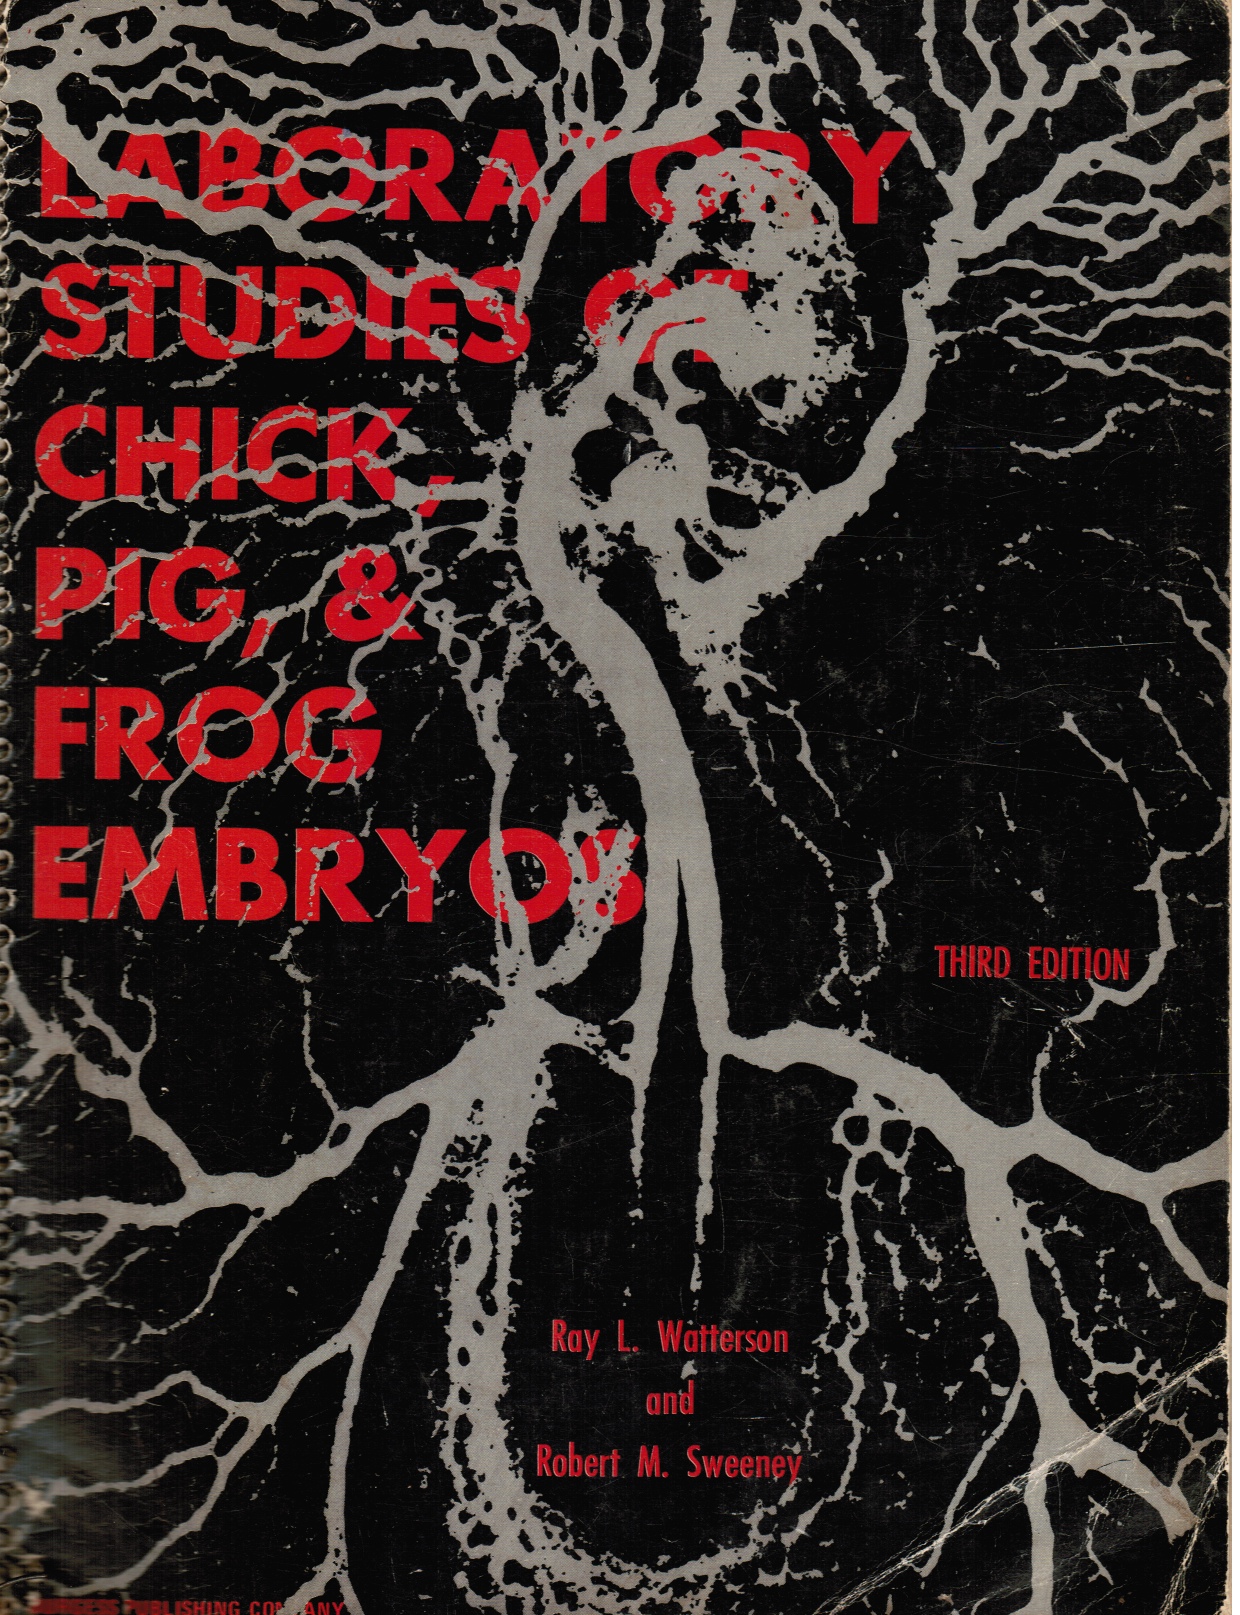 WATTERSON, RAY L; ROBERT M. SWEENEY - Laboratory Studies of Chick, Pig, and Frog Embryos